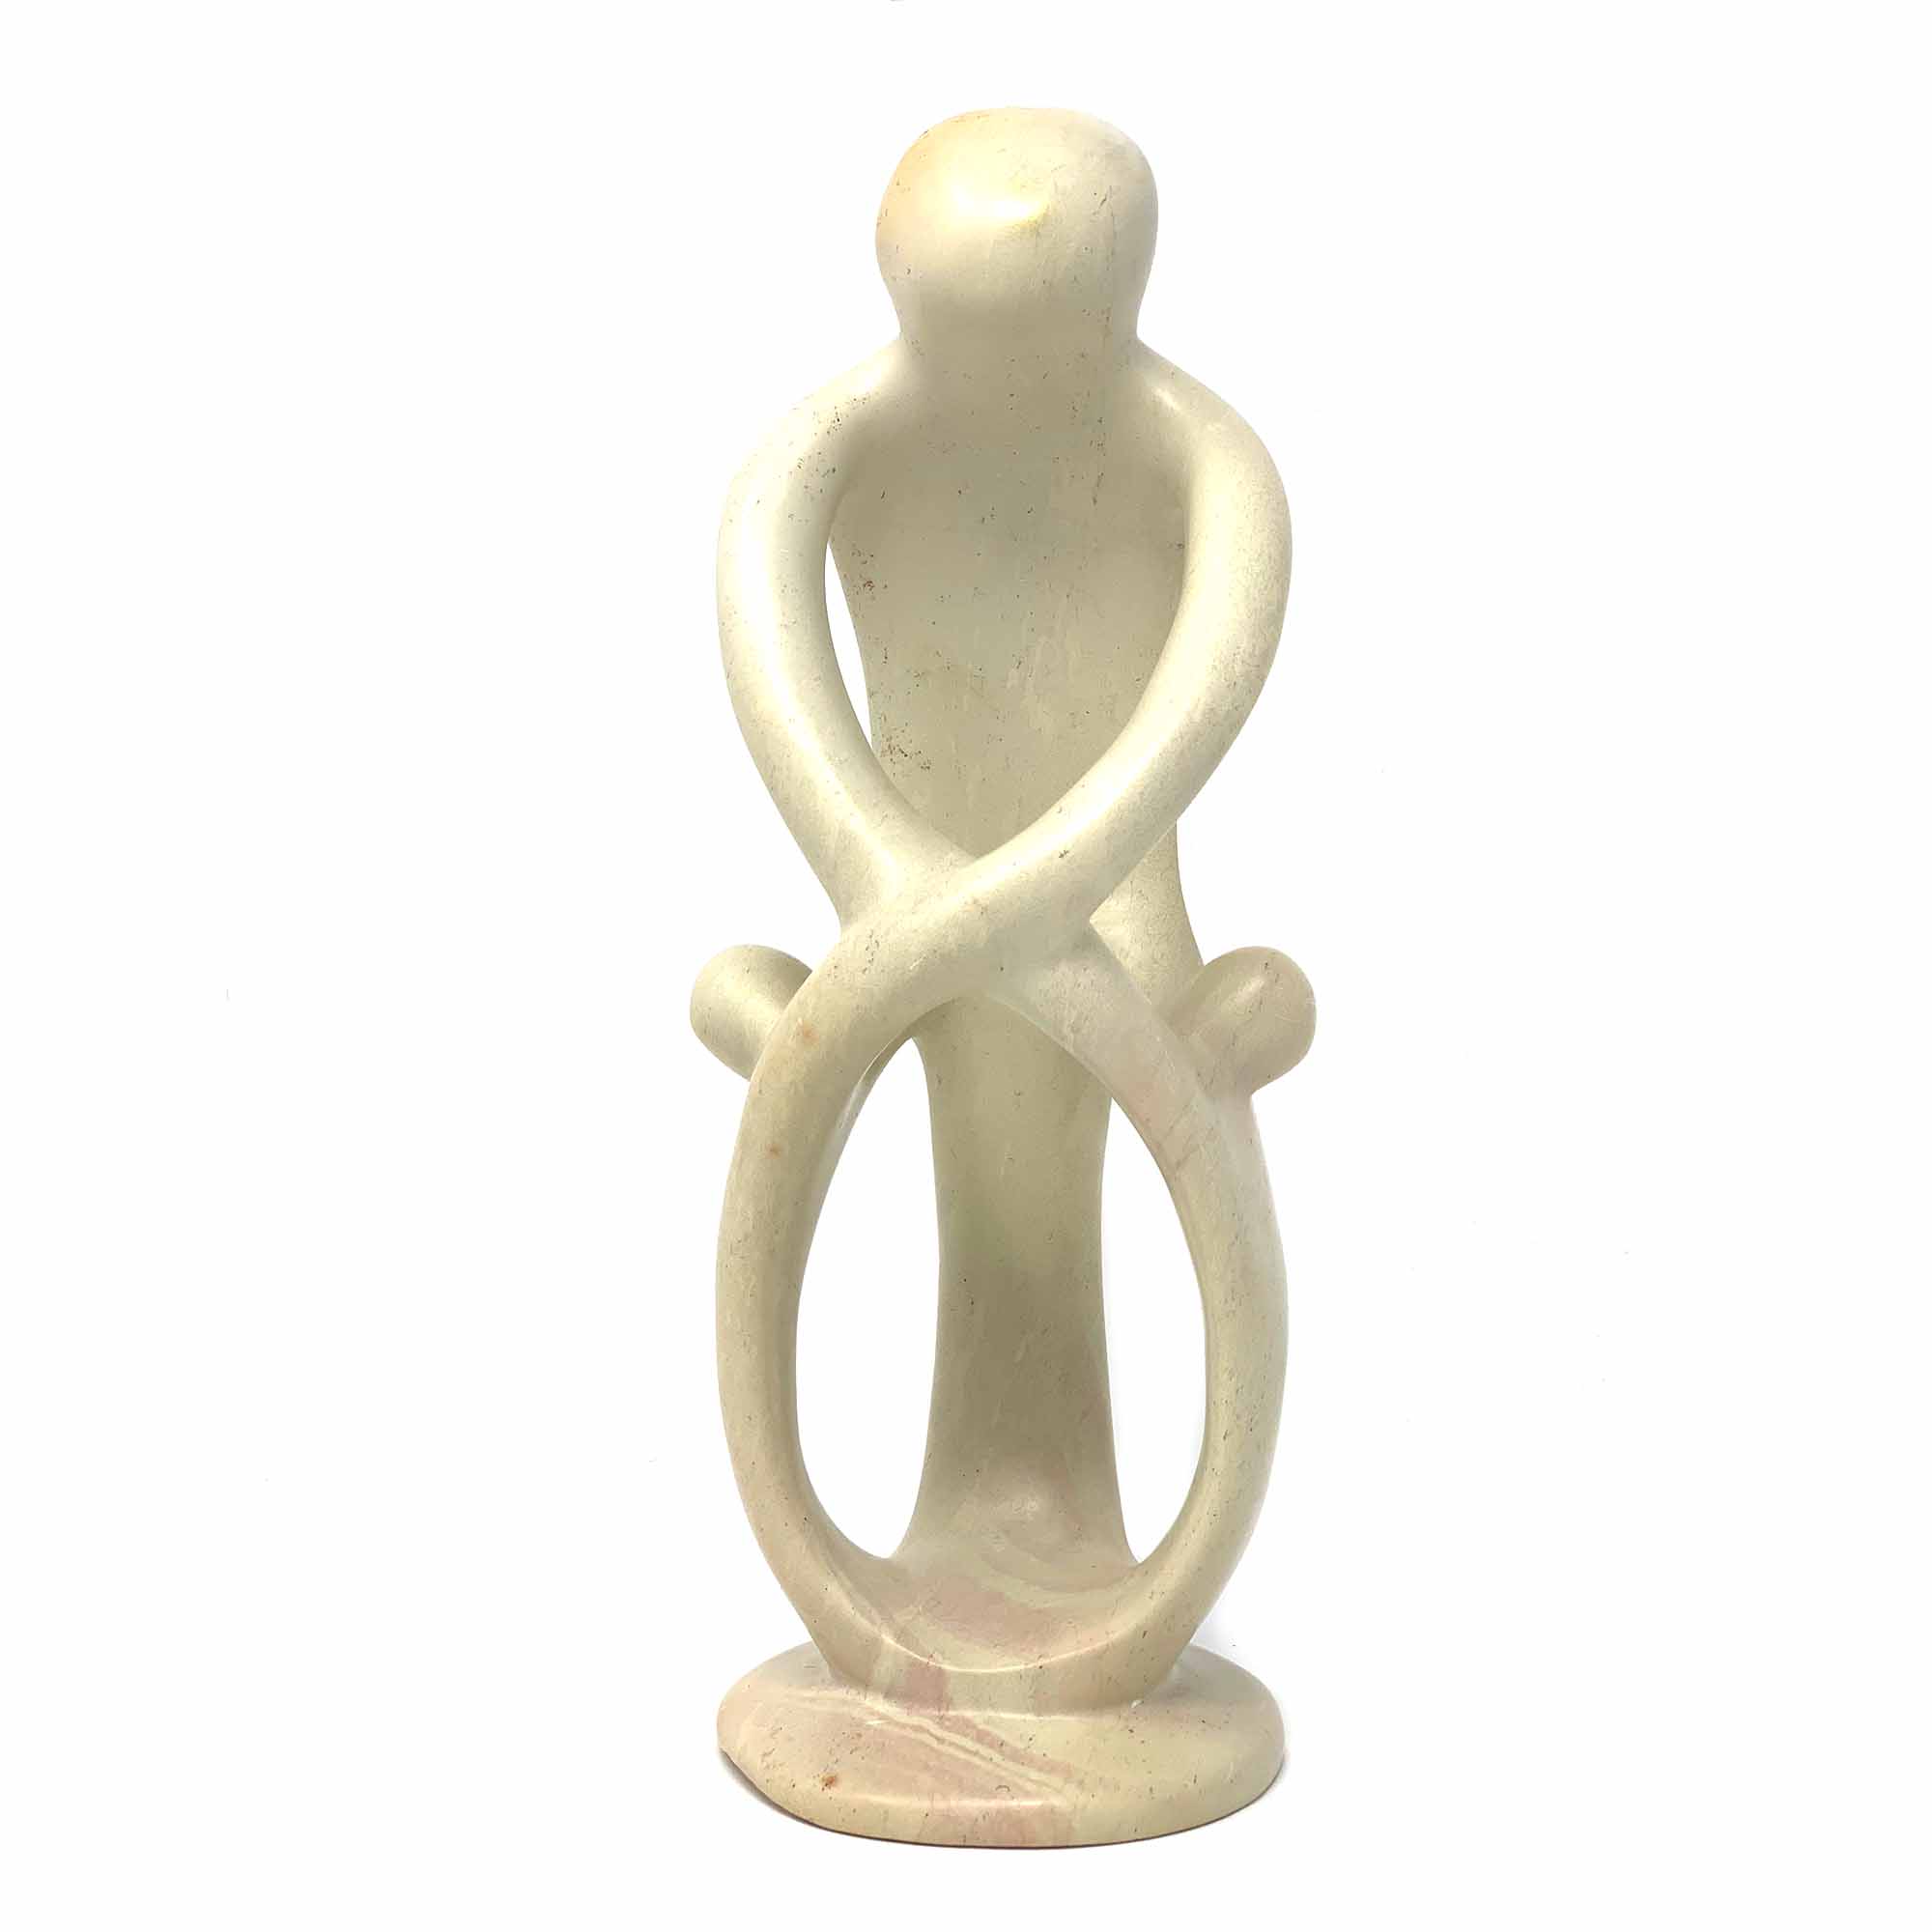 Natural 8-inch Tall Soapstone Family Sculpture - 1 Parent 2 Children